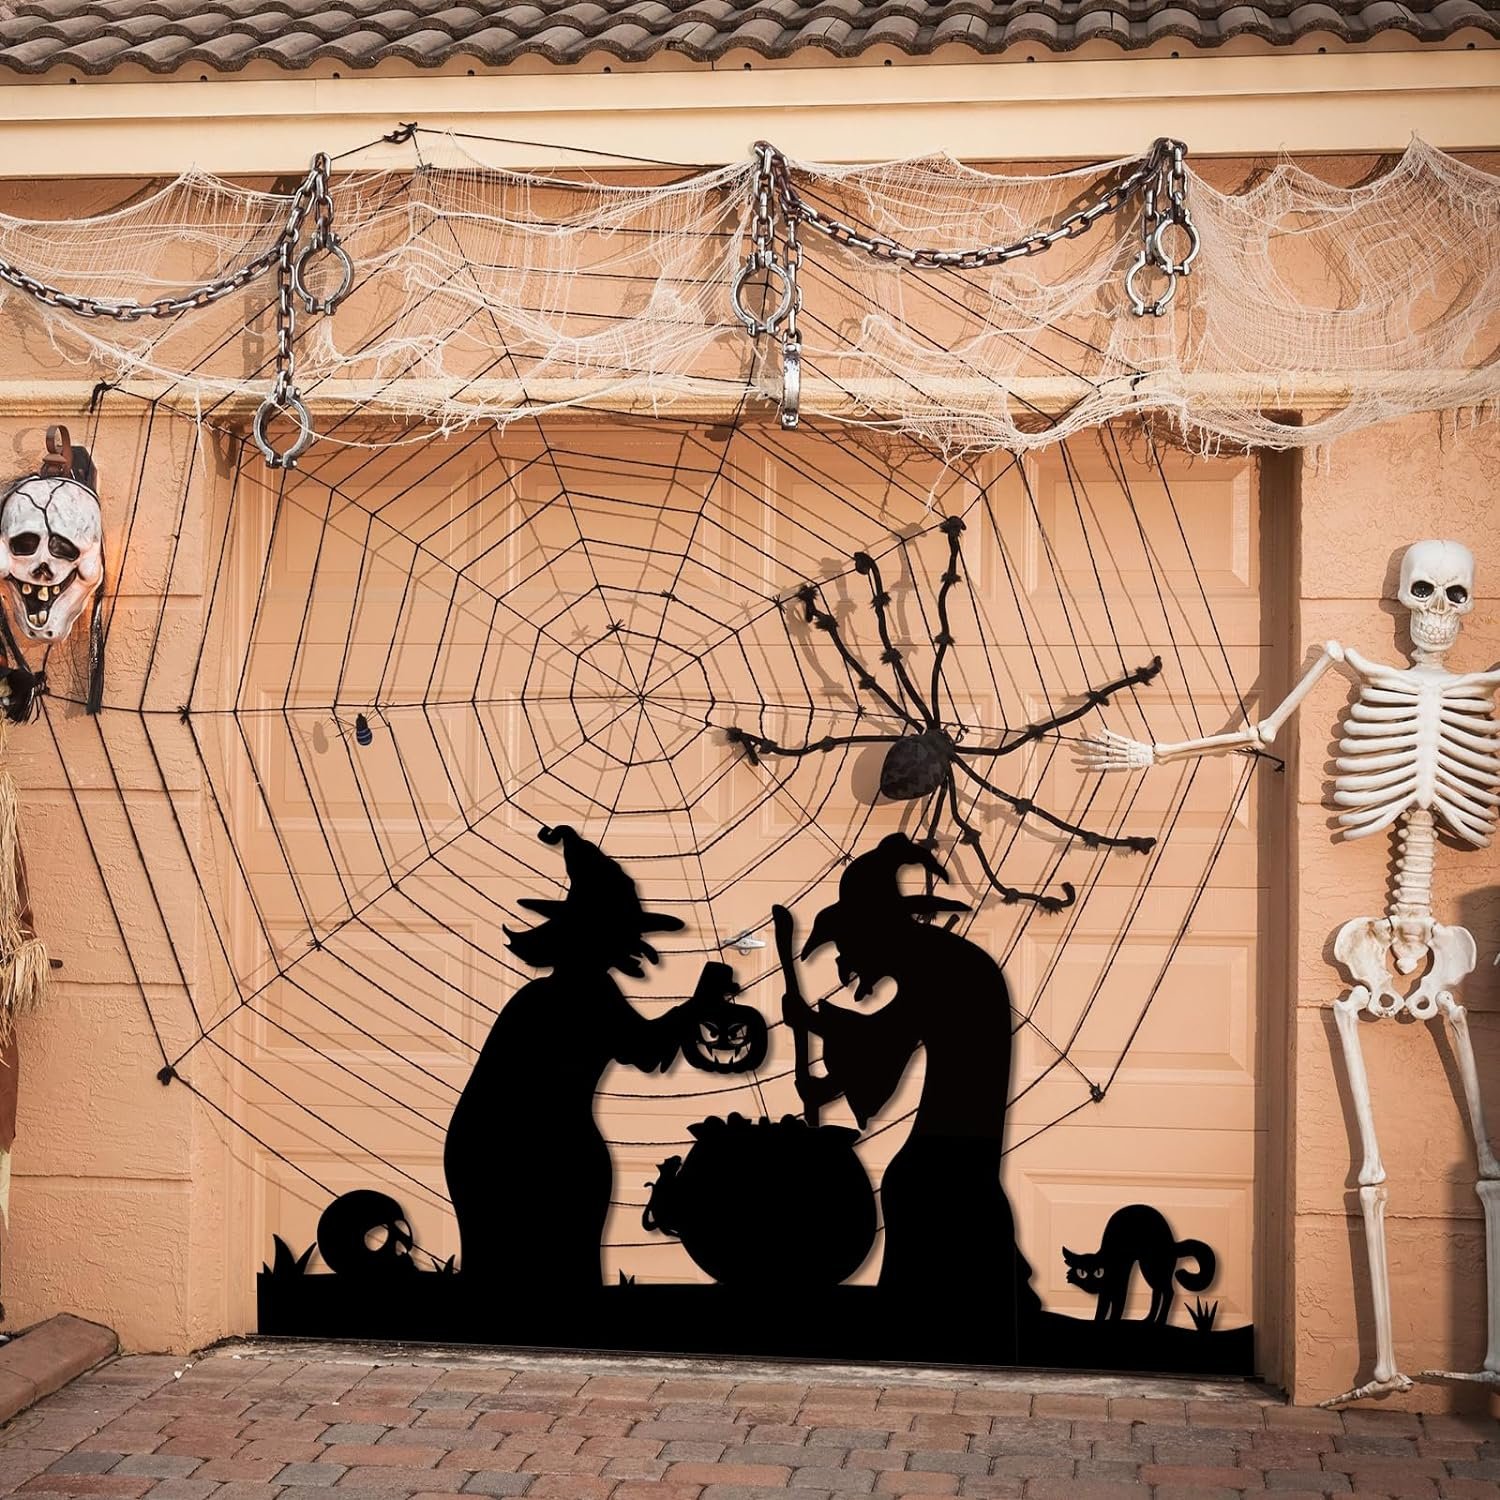 Halloween Witch Decorations Outdoor - 2 Large Black Witches with Cauldron, Scary Halloween Silhouette with Lights for Outside Halloween Garage Door Wall Yard Decor